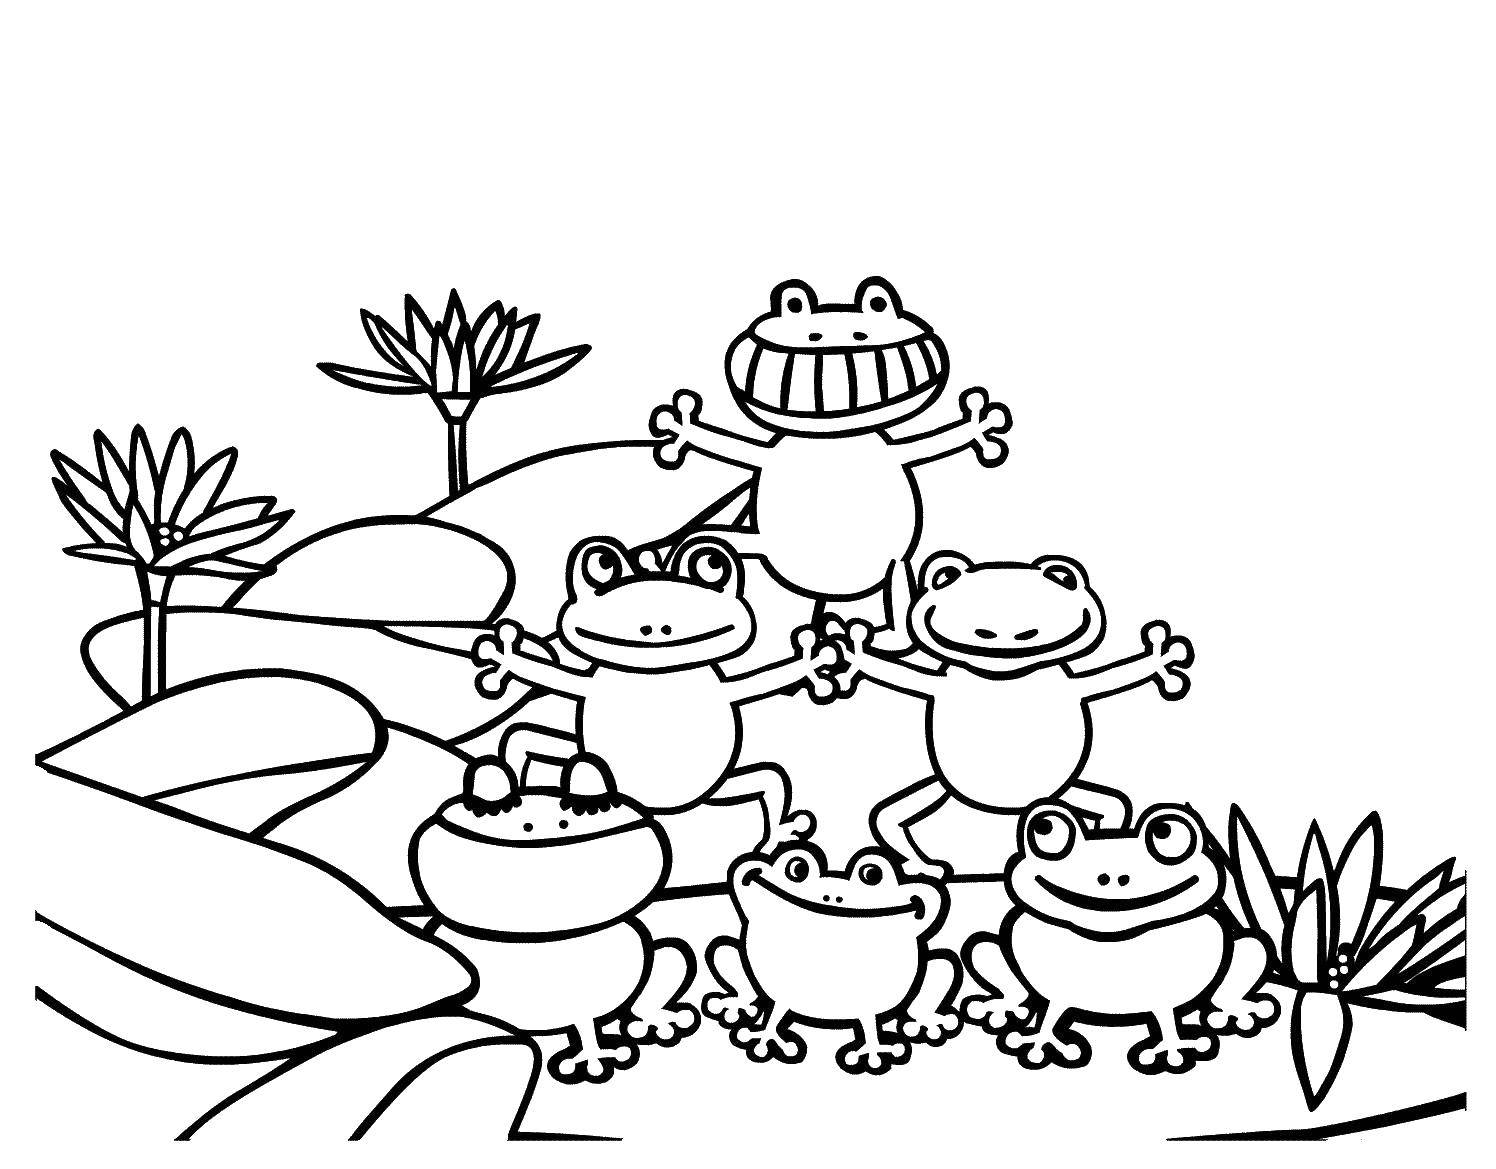 Coloring Frog family. Category the frog. Tags:  Reptile, frog.